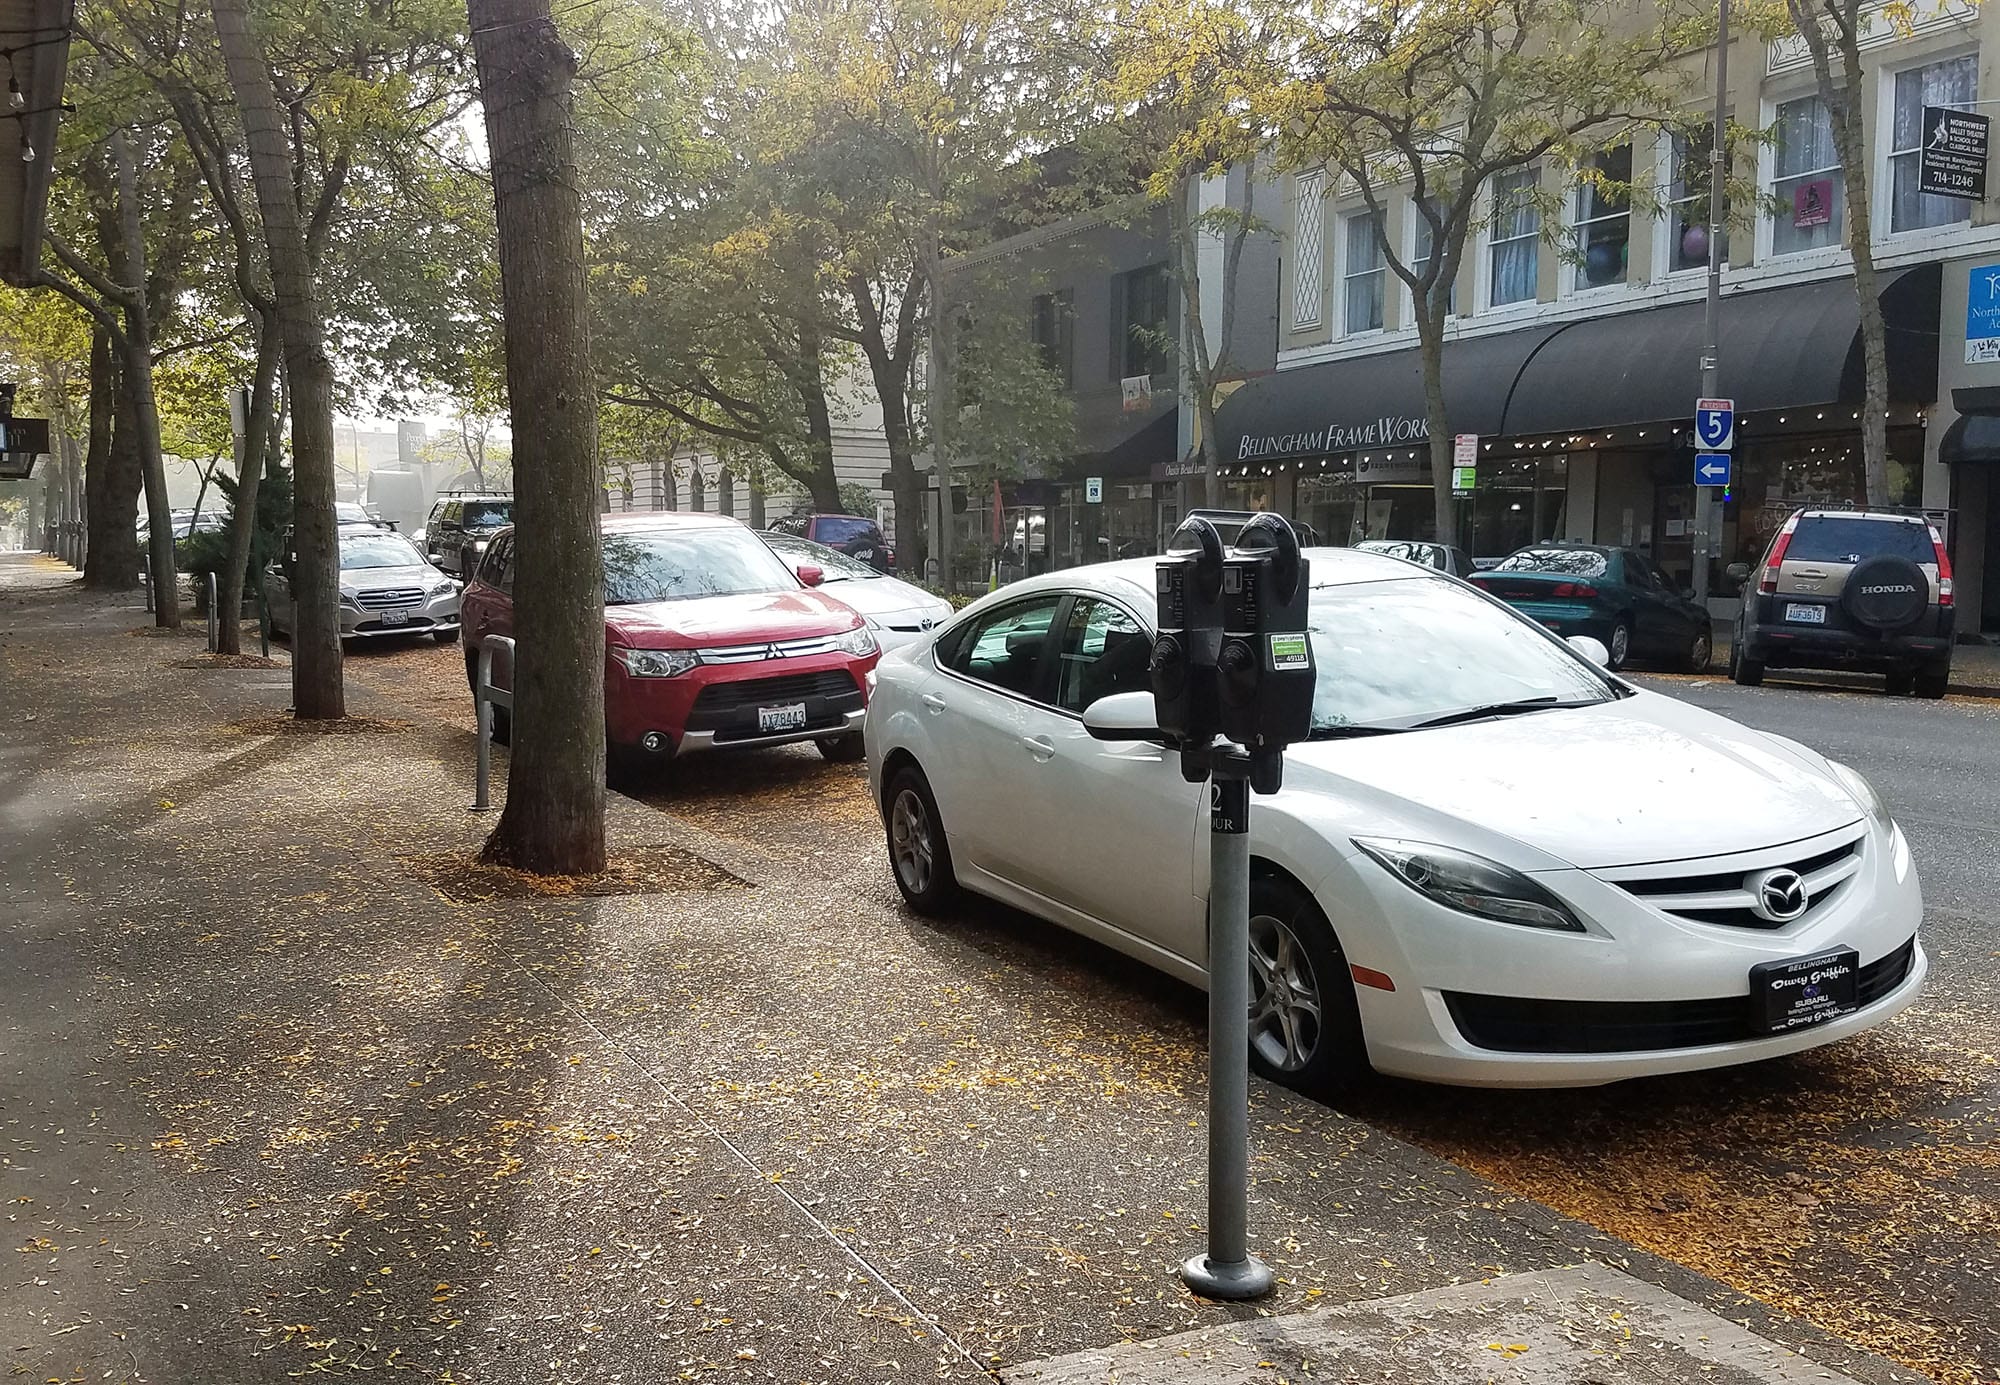 Parking meters and cars parked in downtown Bellingham